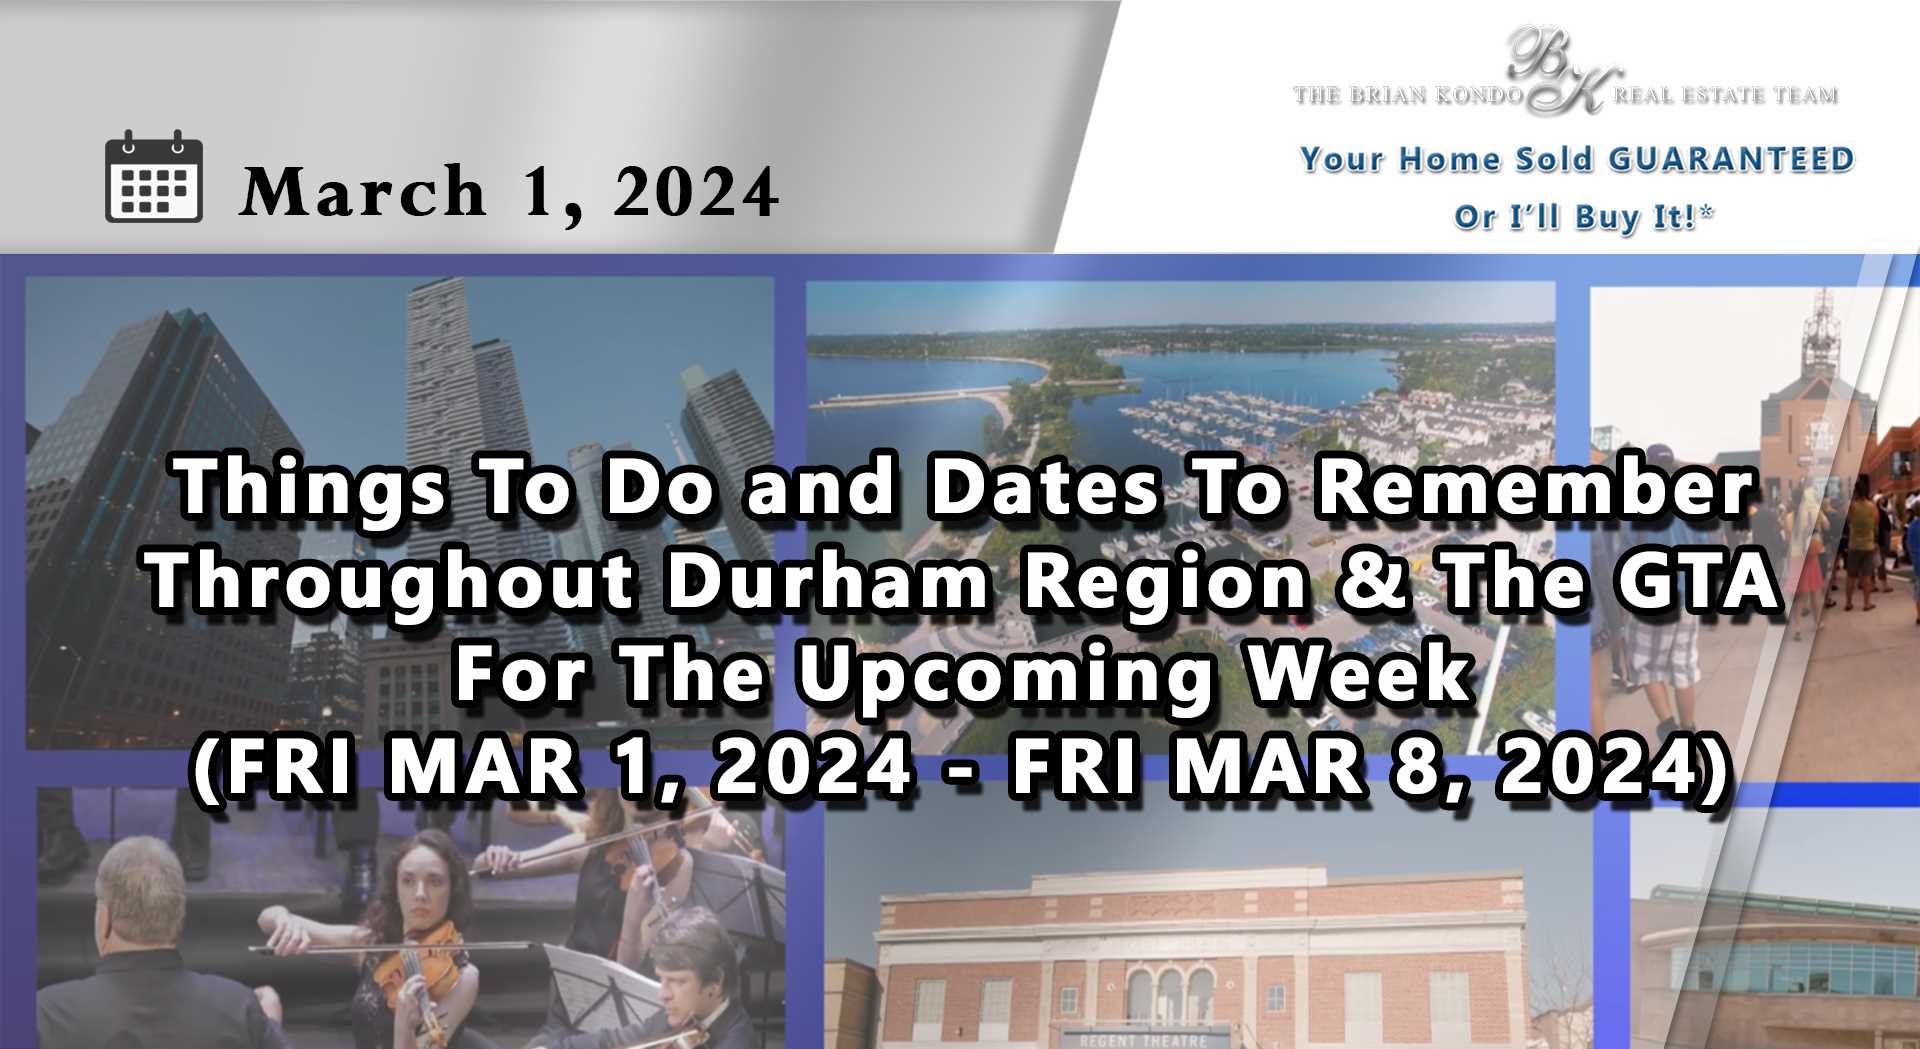 Things To Do and Dates To Remember Throughout Durham Region and The GTA For The Upcoming Week (FRI MAR 1, 2024 - FRI MAR 8, 2024)